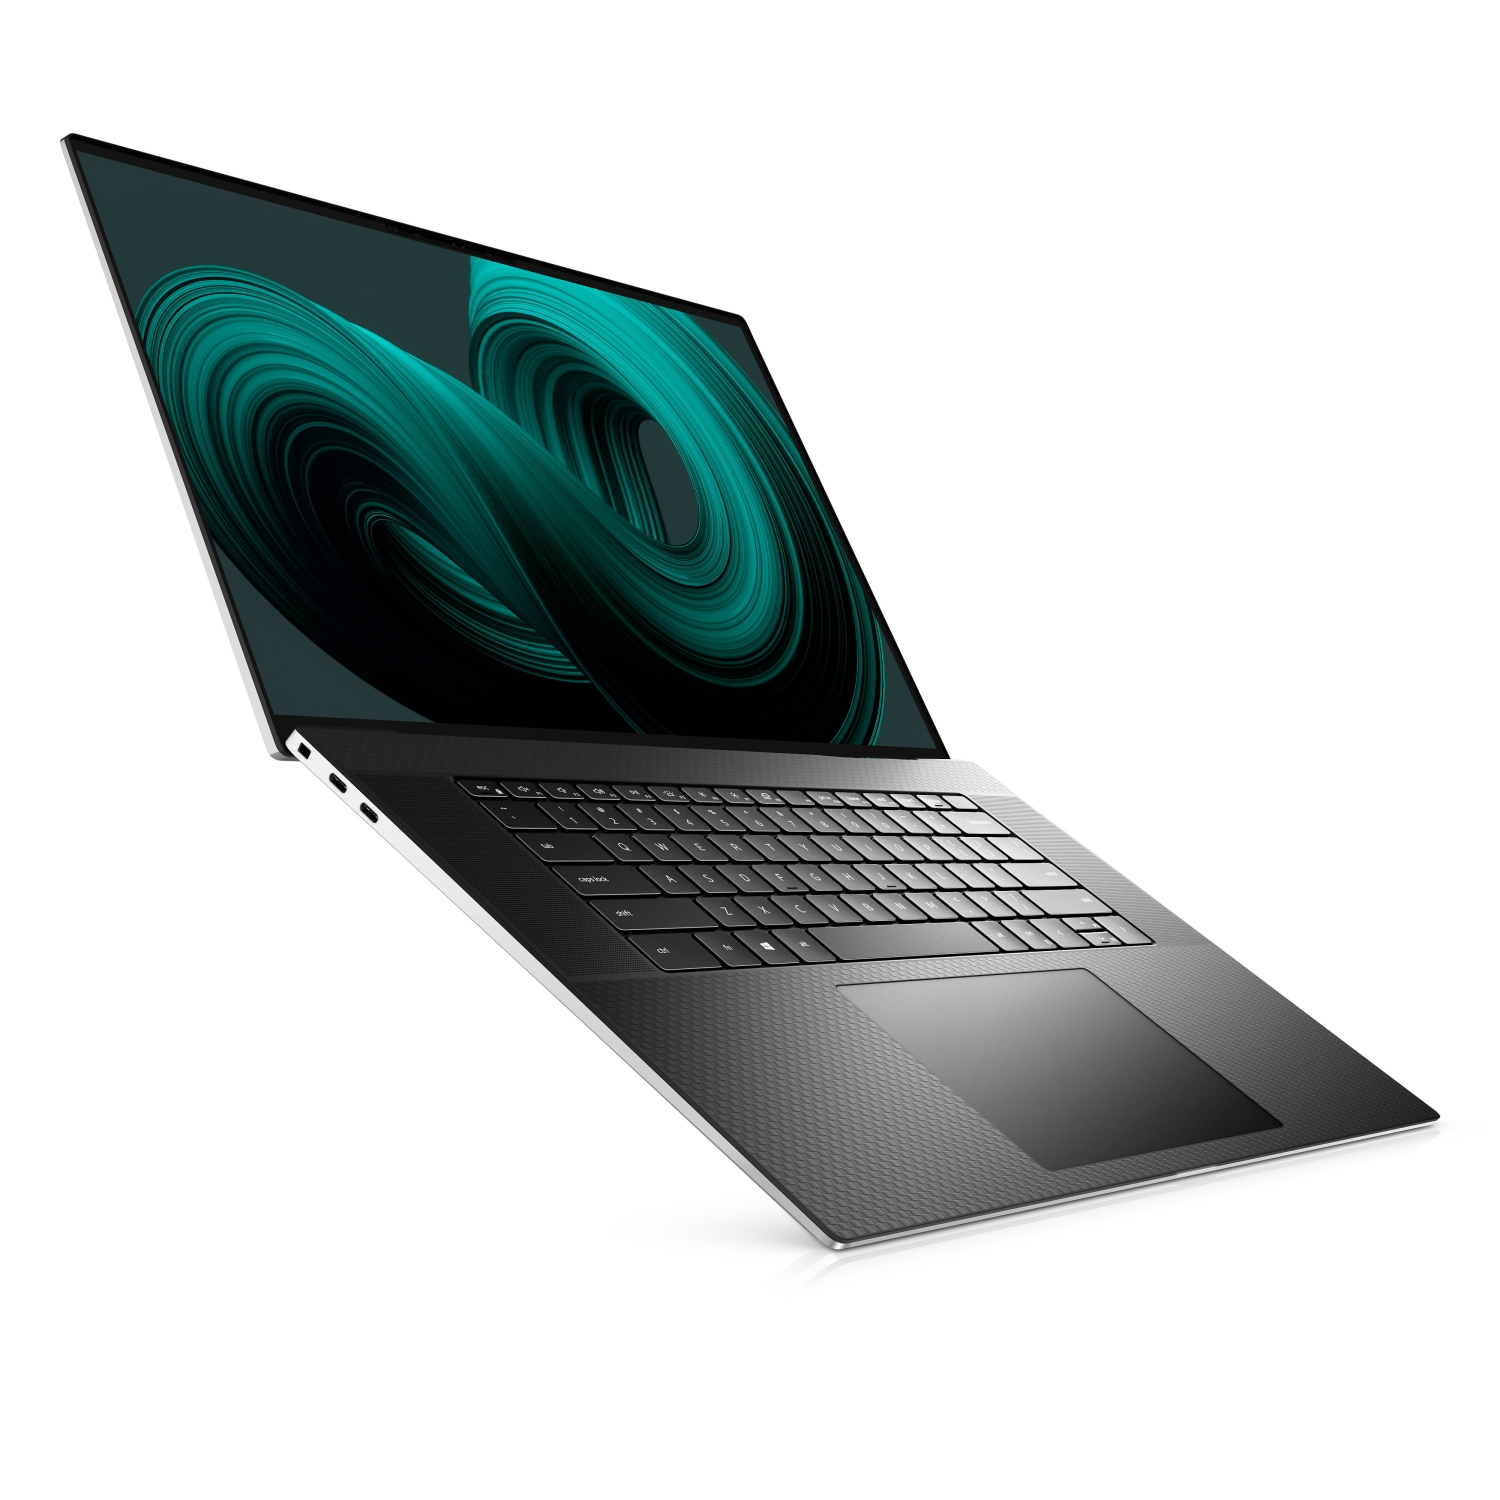 Refurbished (Excellent) - Dell XPS 17 9710 Laptop (2021) | 17" 4K Touch | Core i7 - 4TB SSD - 32GB RAM - RTX 3060 | 8 Cores @ 4.6 GHz - 11th Gen CPU Certified Refurbished